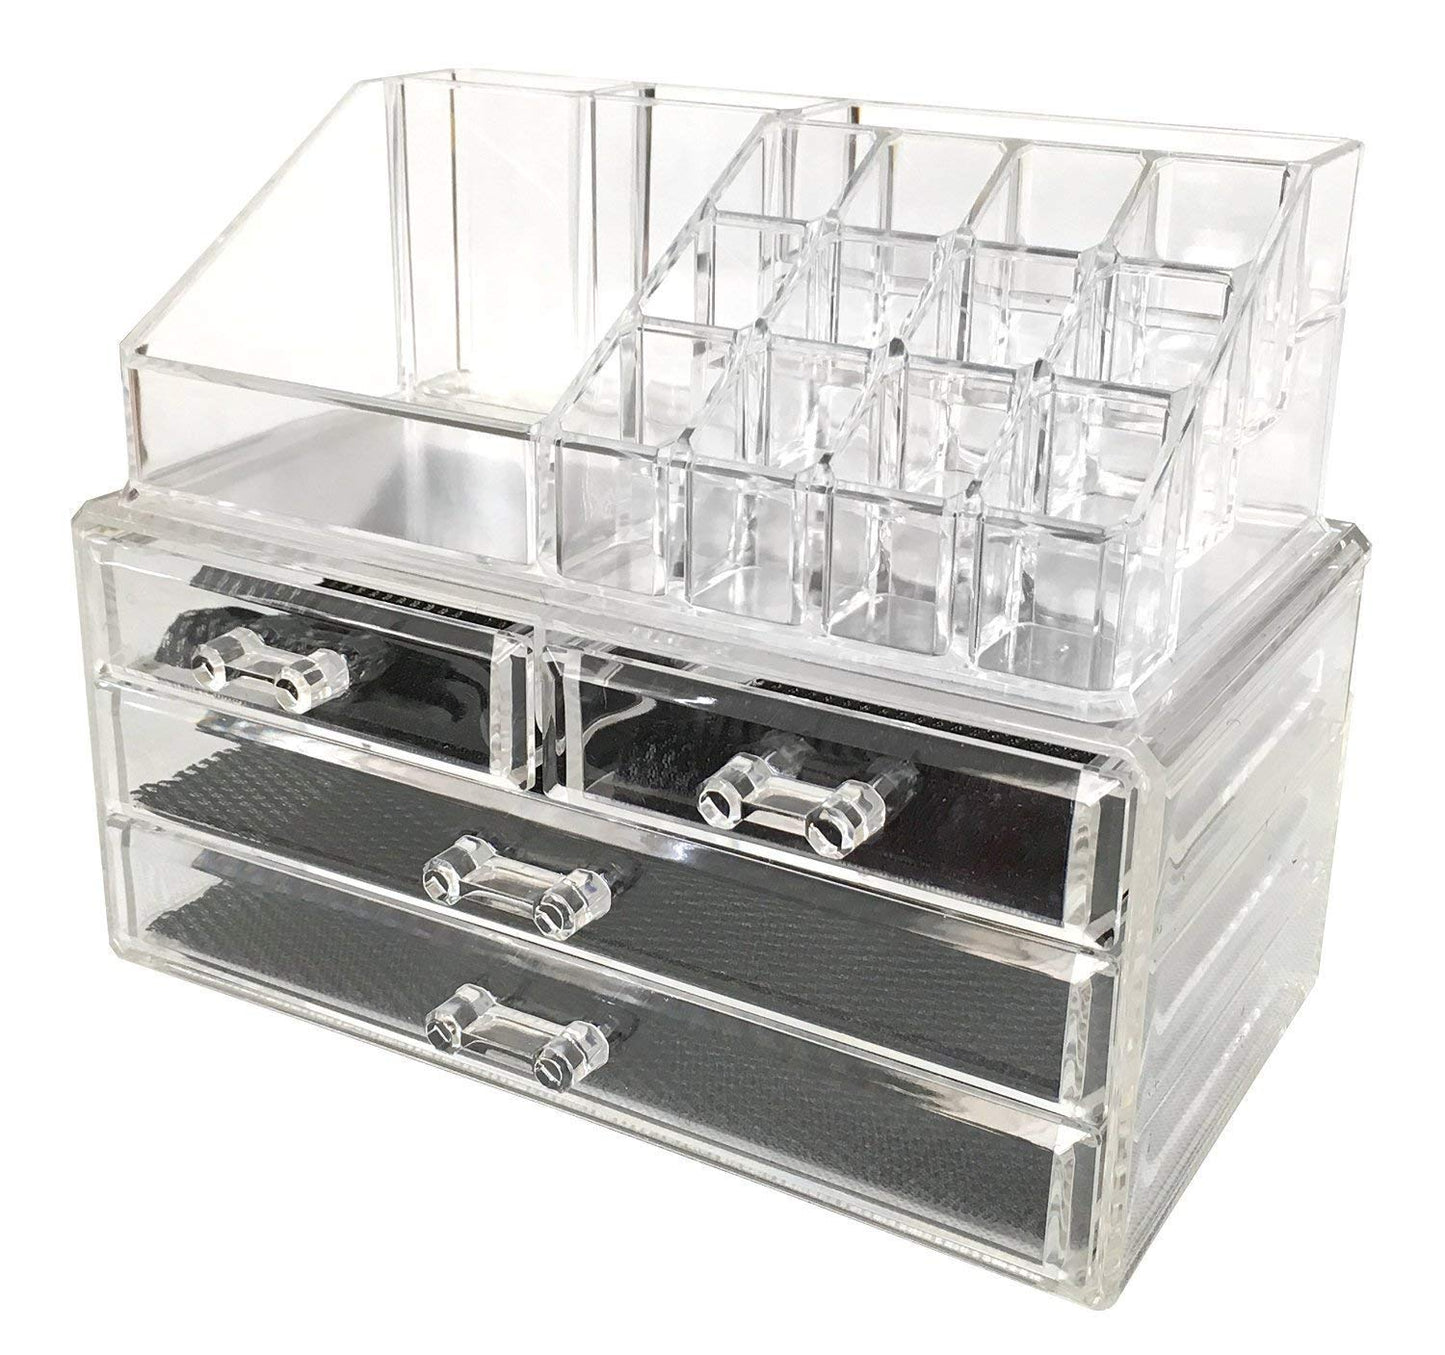 Acrylic 3 Drawers 12 Trapezoid Lipstick Makeup Display Stand Cosmetic Organizer Holder Case jewelry Box Storage - Deliverrpk